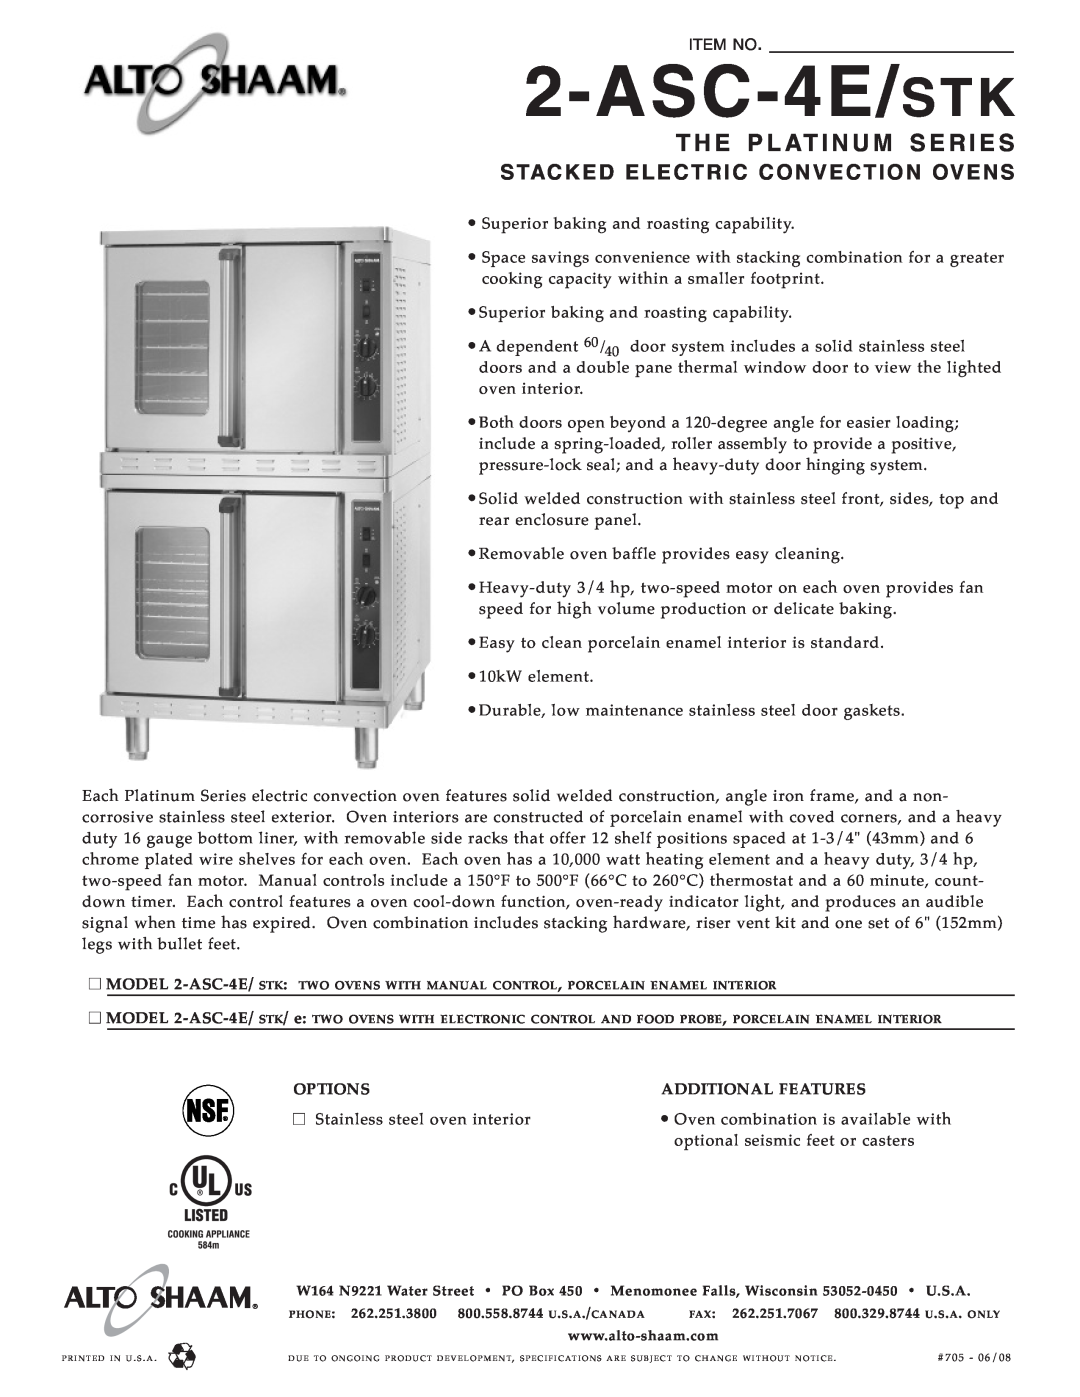 Alto-Shaam 2-ASC-4E/STK specifications Sta Cked Elect Ric Convection Ove Ns, Options, Additional Features, ASC-4E/ STK 